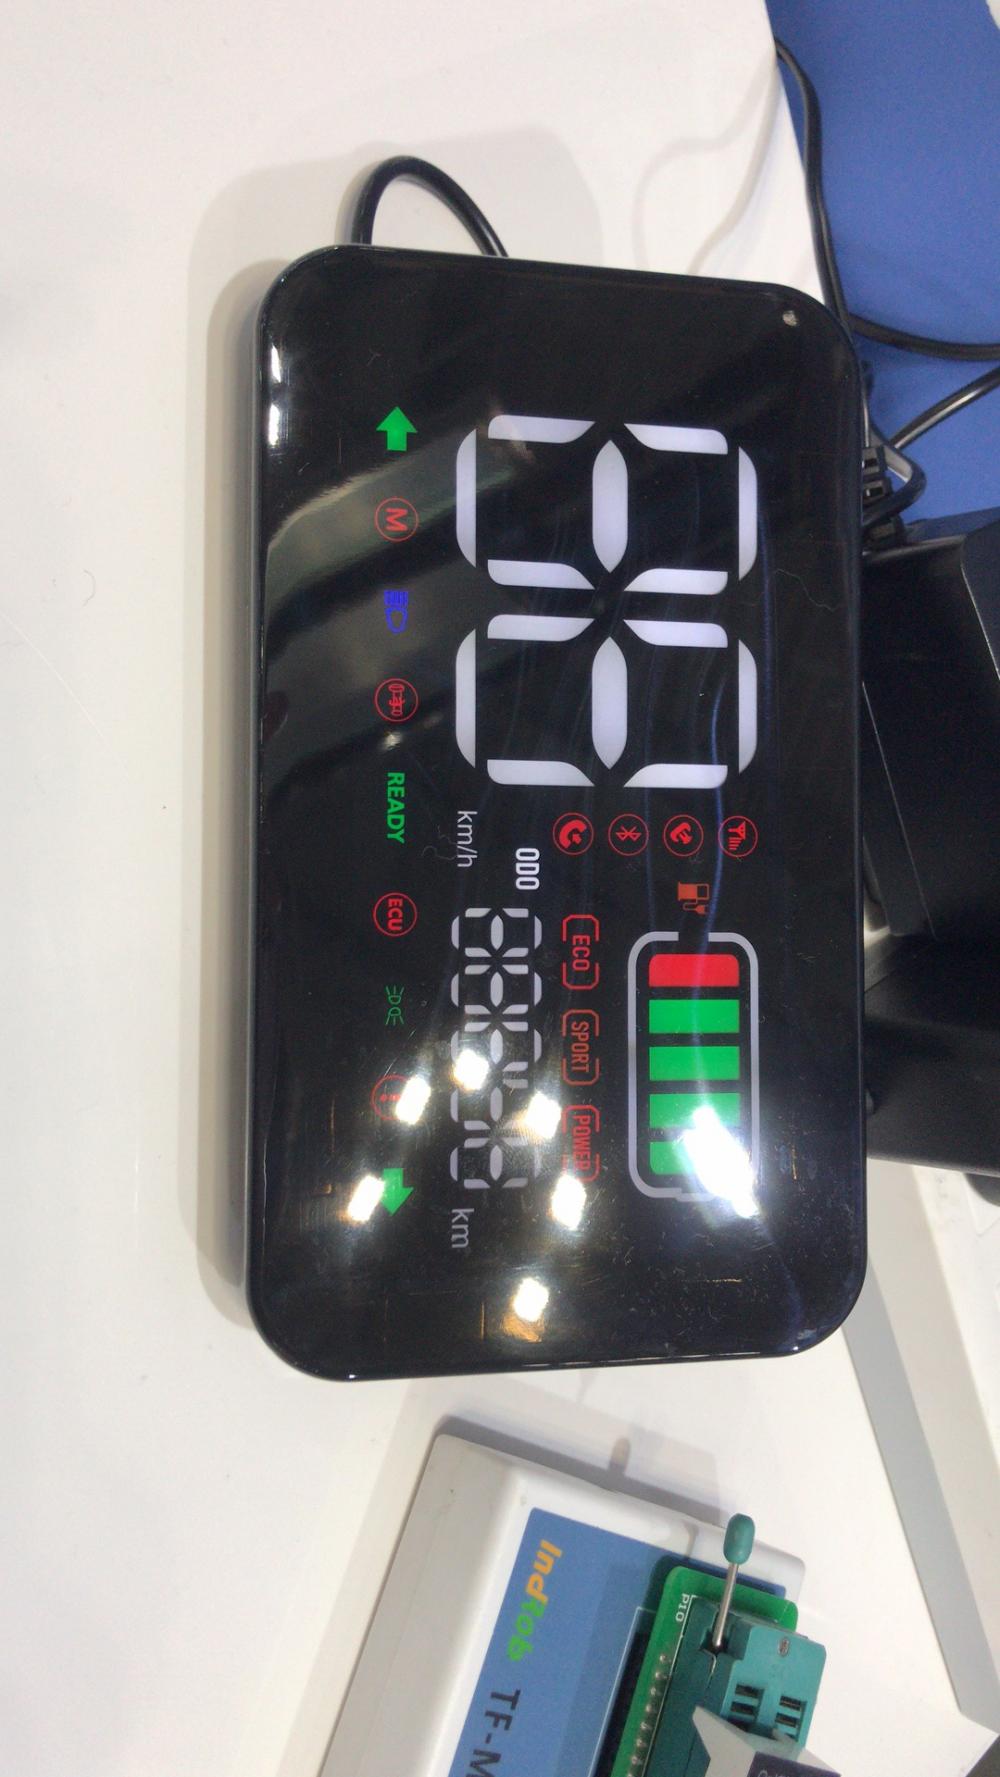 Customized LED Display Electric vehicle with nulti color